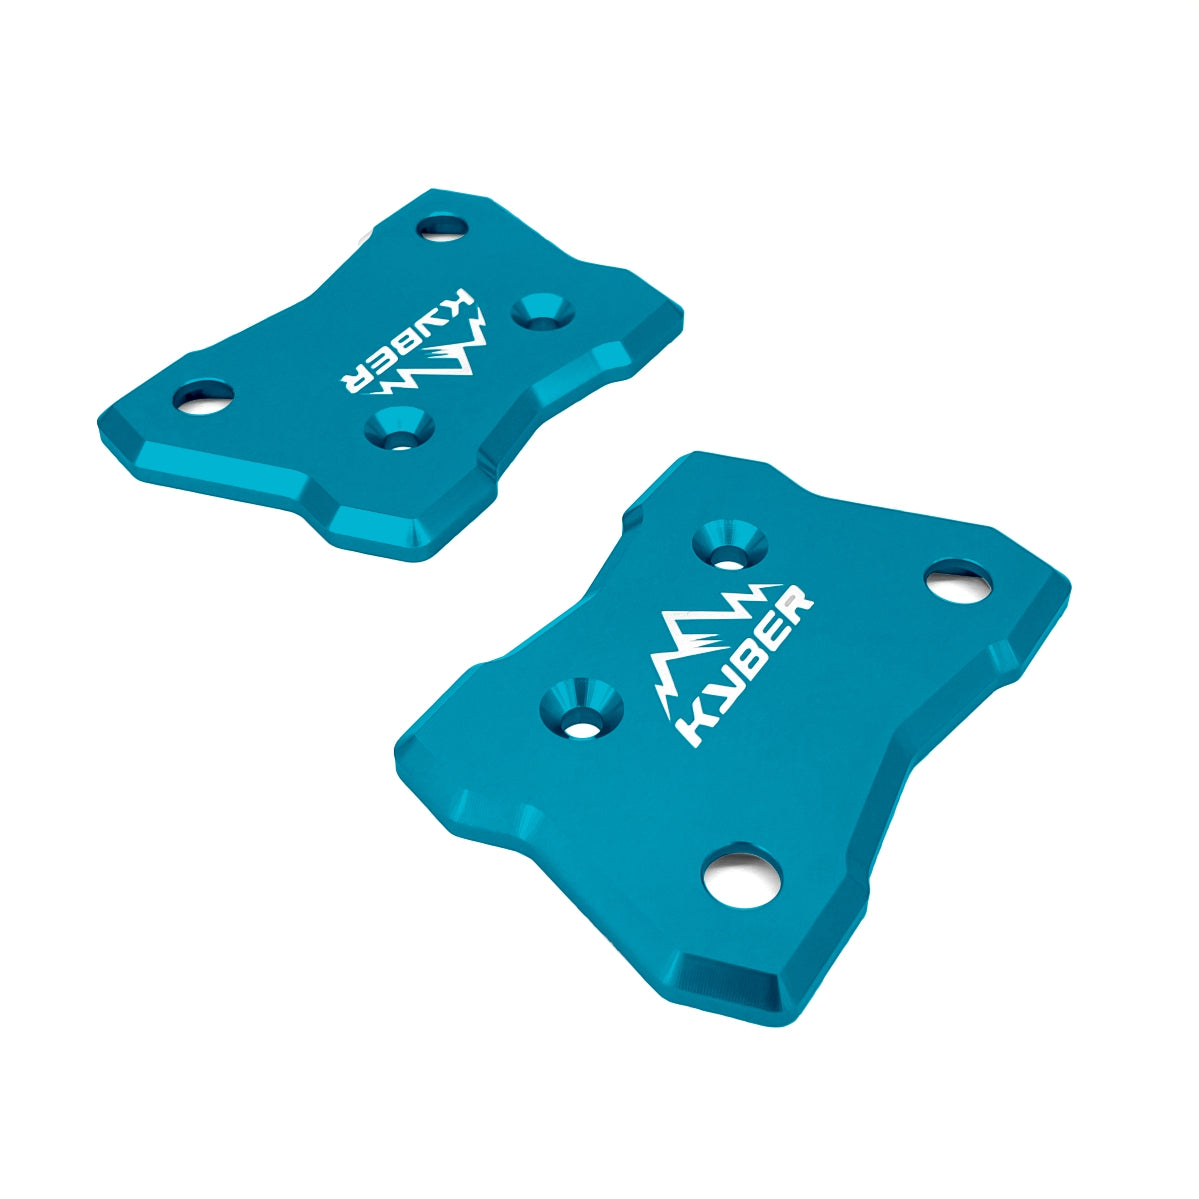 LinQ Mount - Adapter Plates